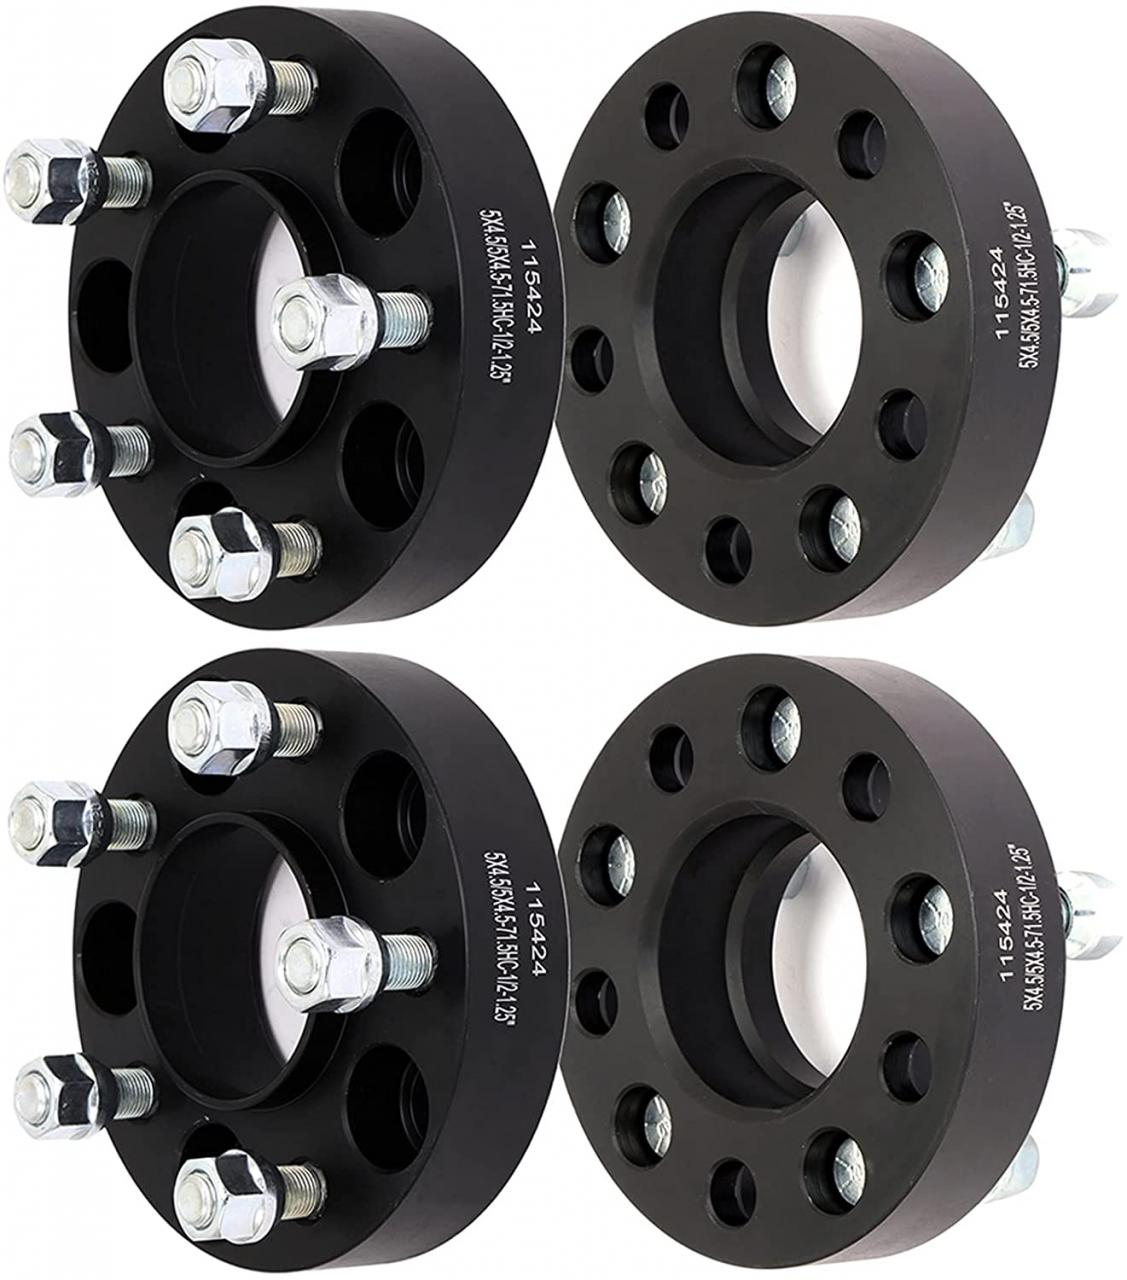 Buy ECCPP 2X 1.5 inch 5 Lug Hubcentric Wheel Spacers 5x4.75 to 5x4.75  70.5mm with 12x1.5 Studs Online in Indonesia. B012ZQSMFQ